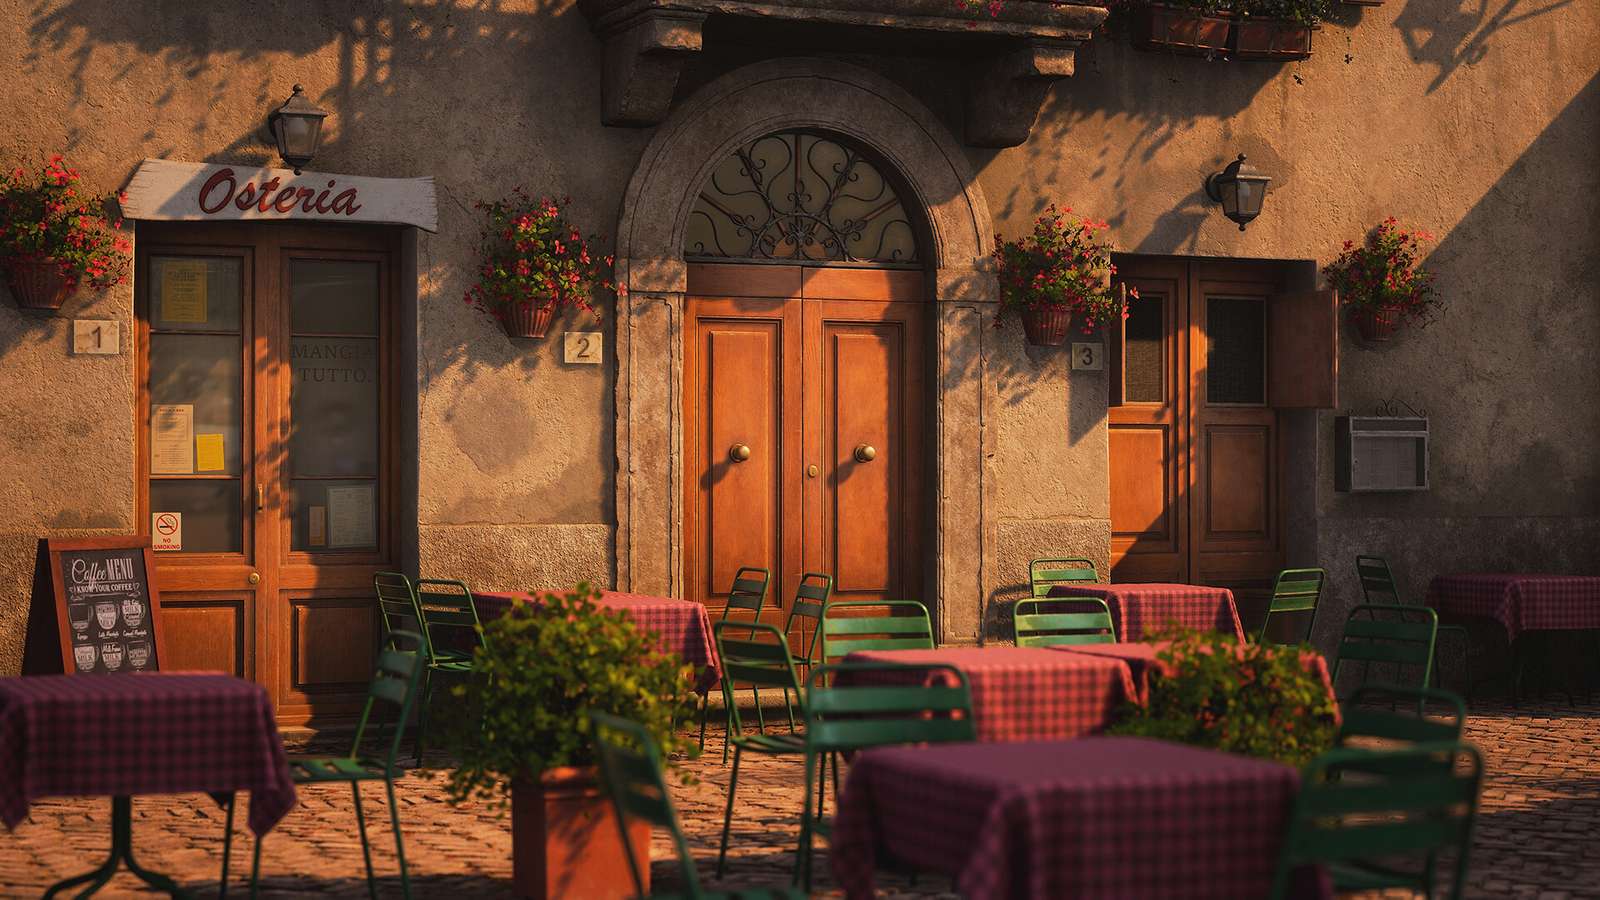 A small Italian cafe jigsaw puzzle online